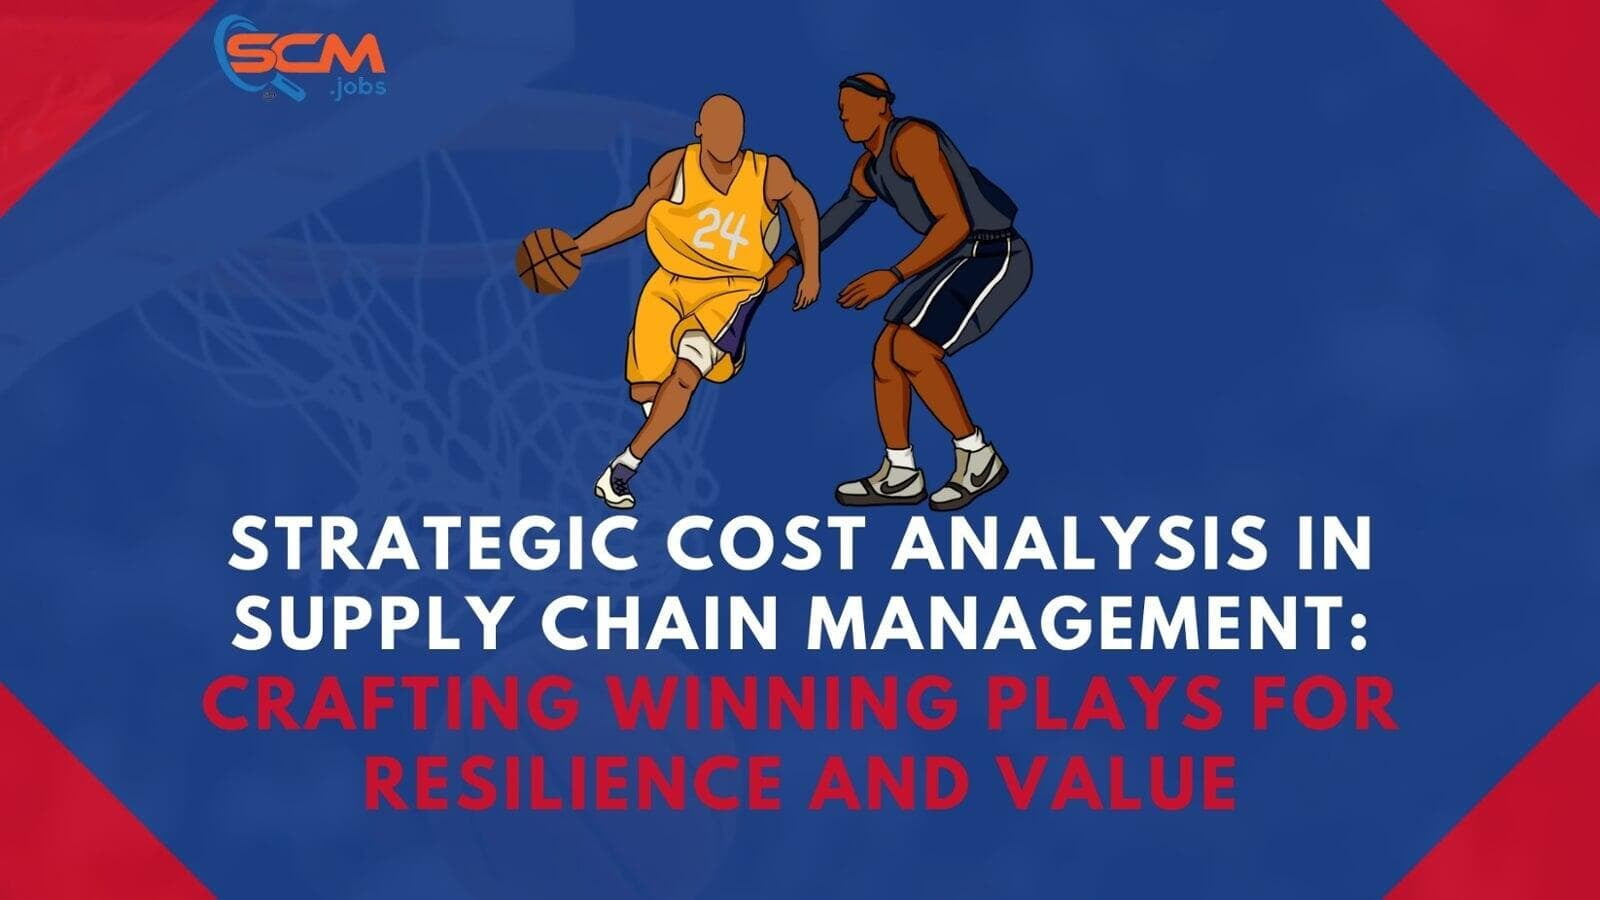 Strategic Cost Analysis in Supply Chain Management: Crafting Winning Plays for Resilience and Value